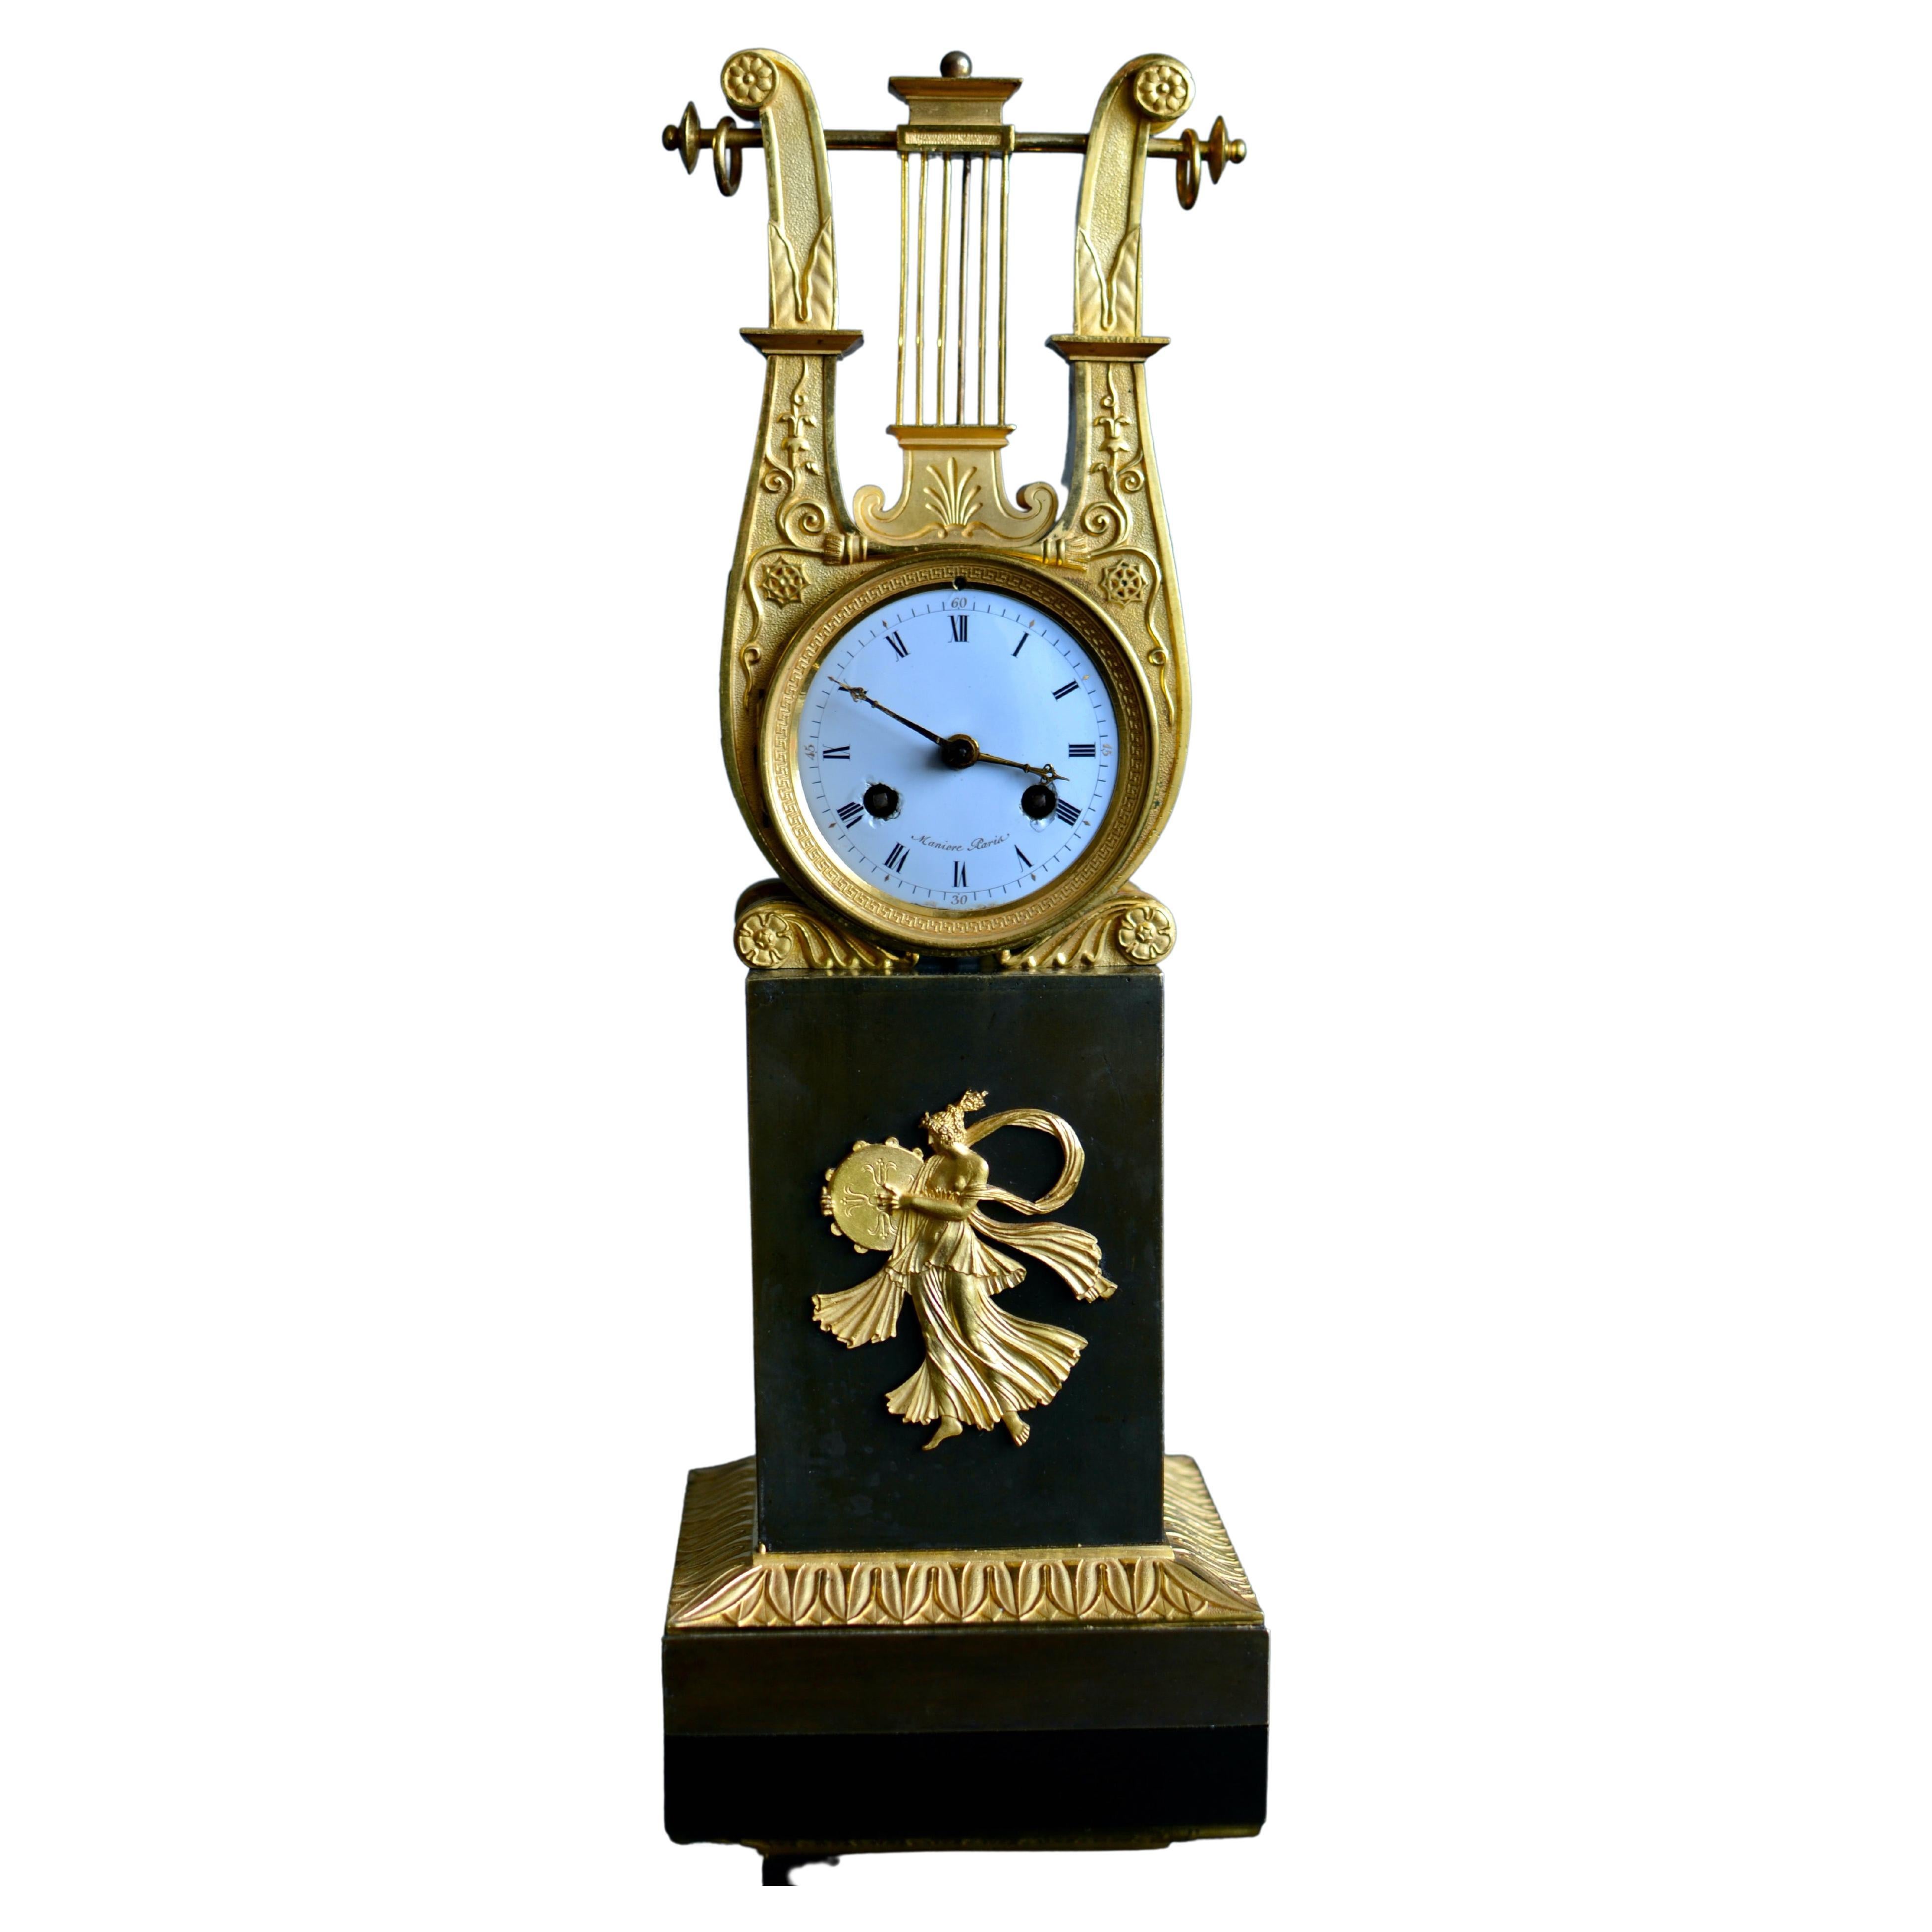 A fine gilt and patinated early empire gilt bronze clock attributed to Thomire. Dial signed Manière Paris. The lyre shaped clockcase is of very high quality with the gilding and the patinated surface in very good condition. The enamel dial is signed